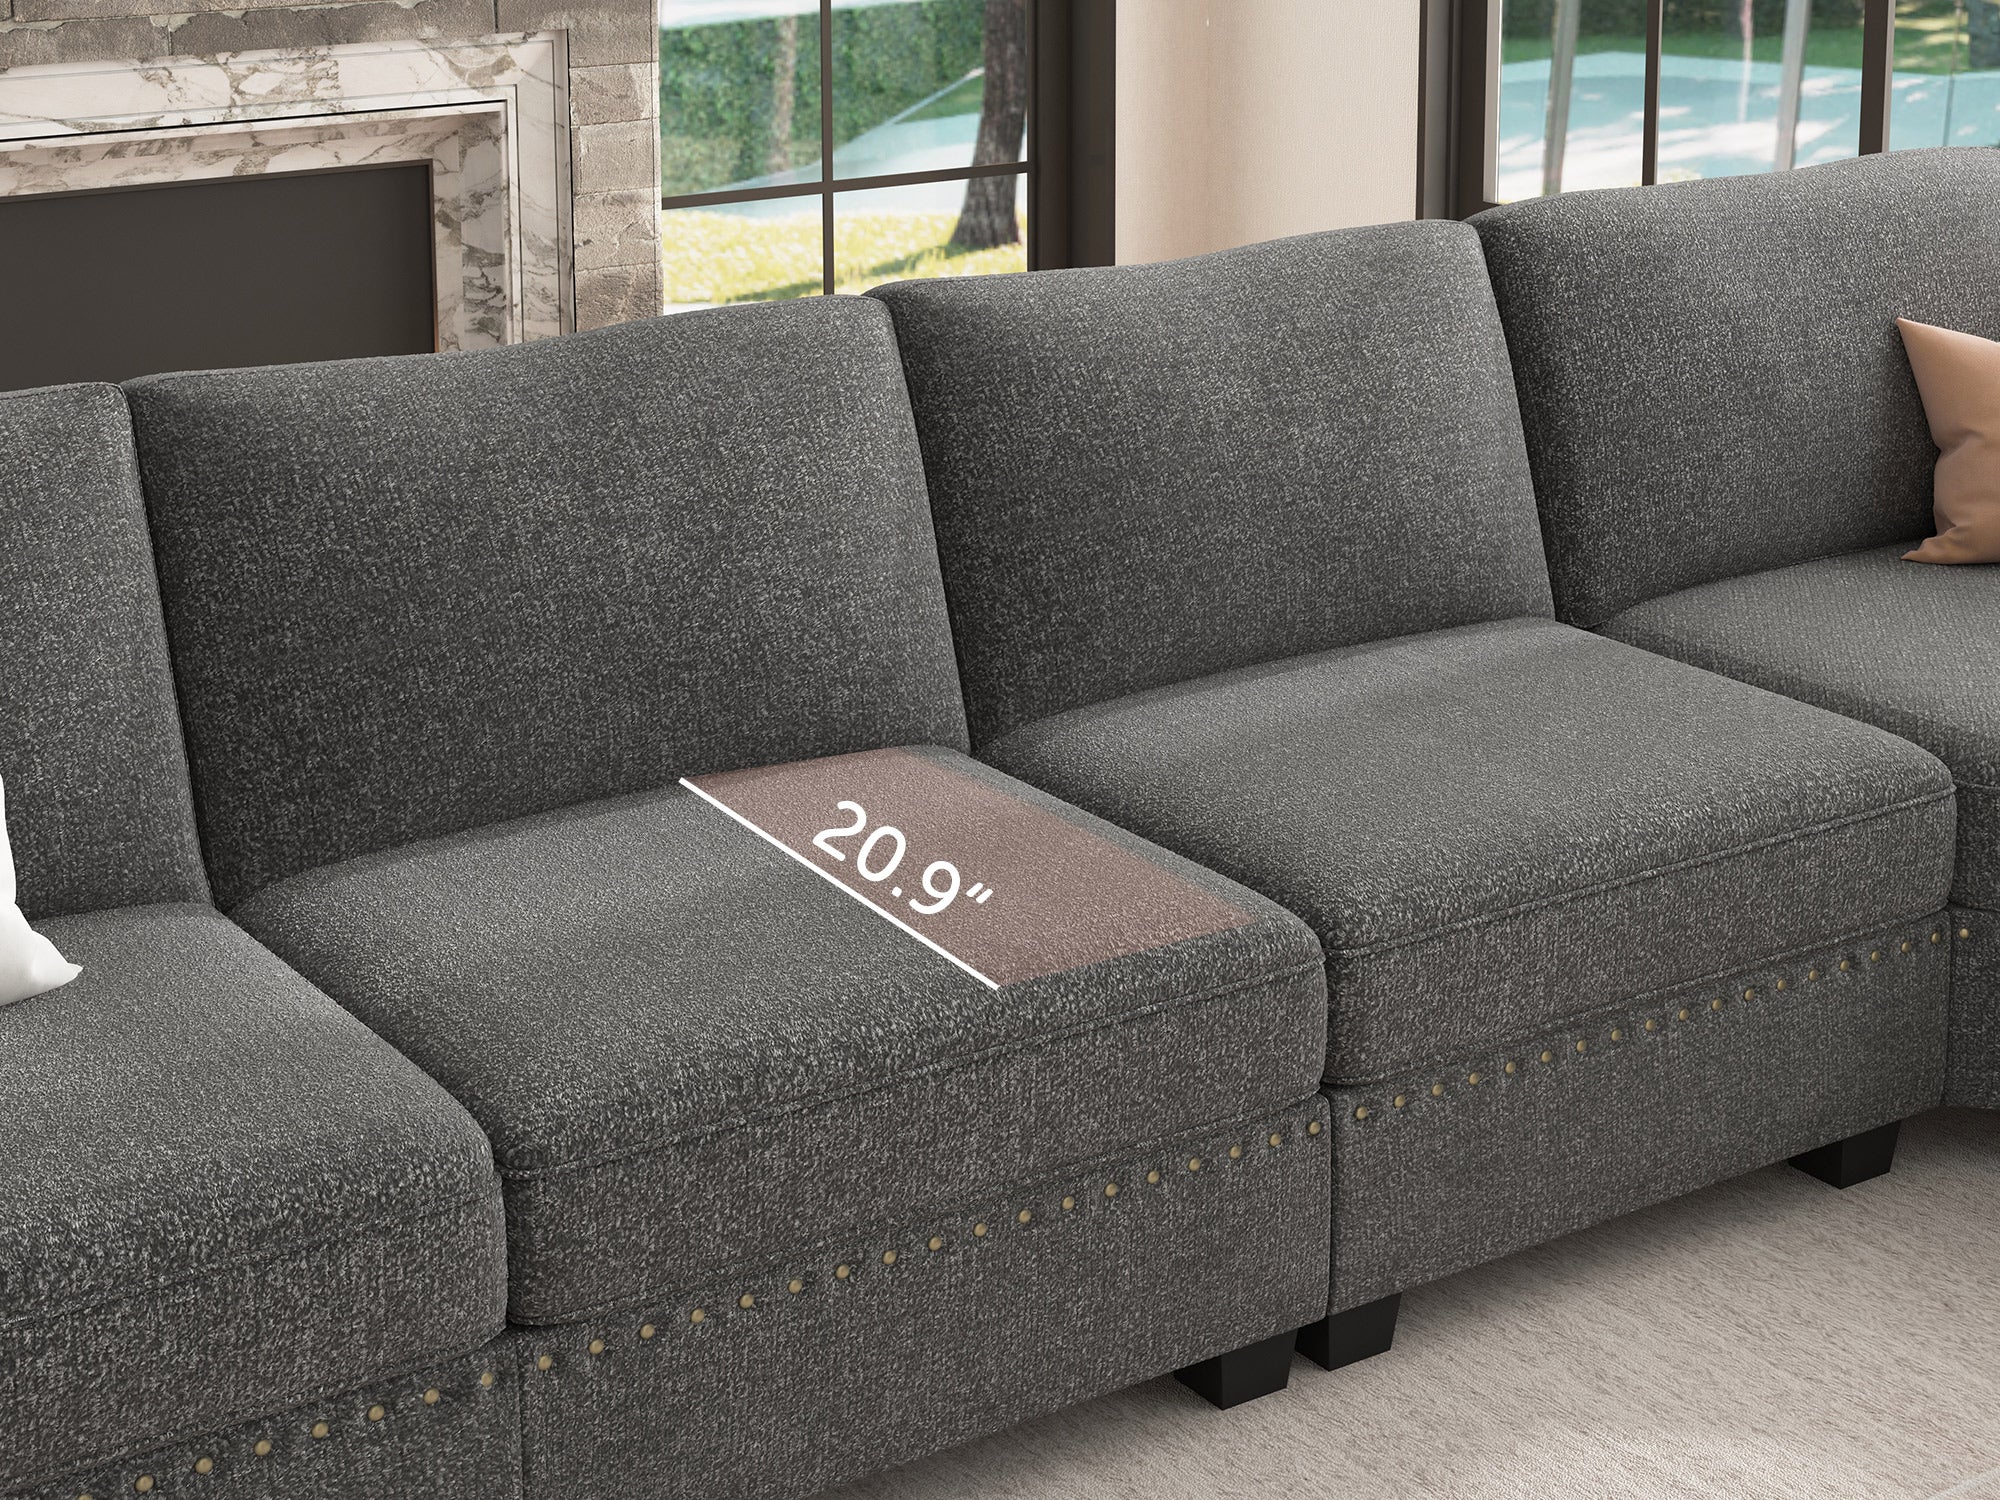 NOLANY 4-Seat Corner Modular Sofa Oversized Sectional Couch for Living Room #Color_Light Grey